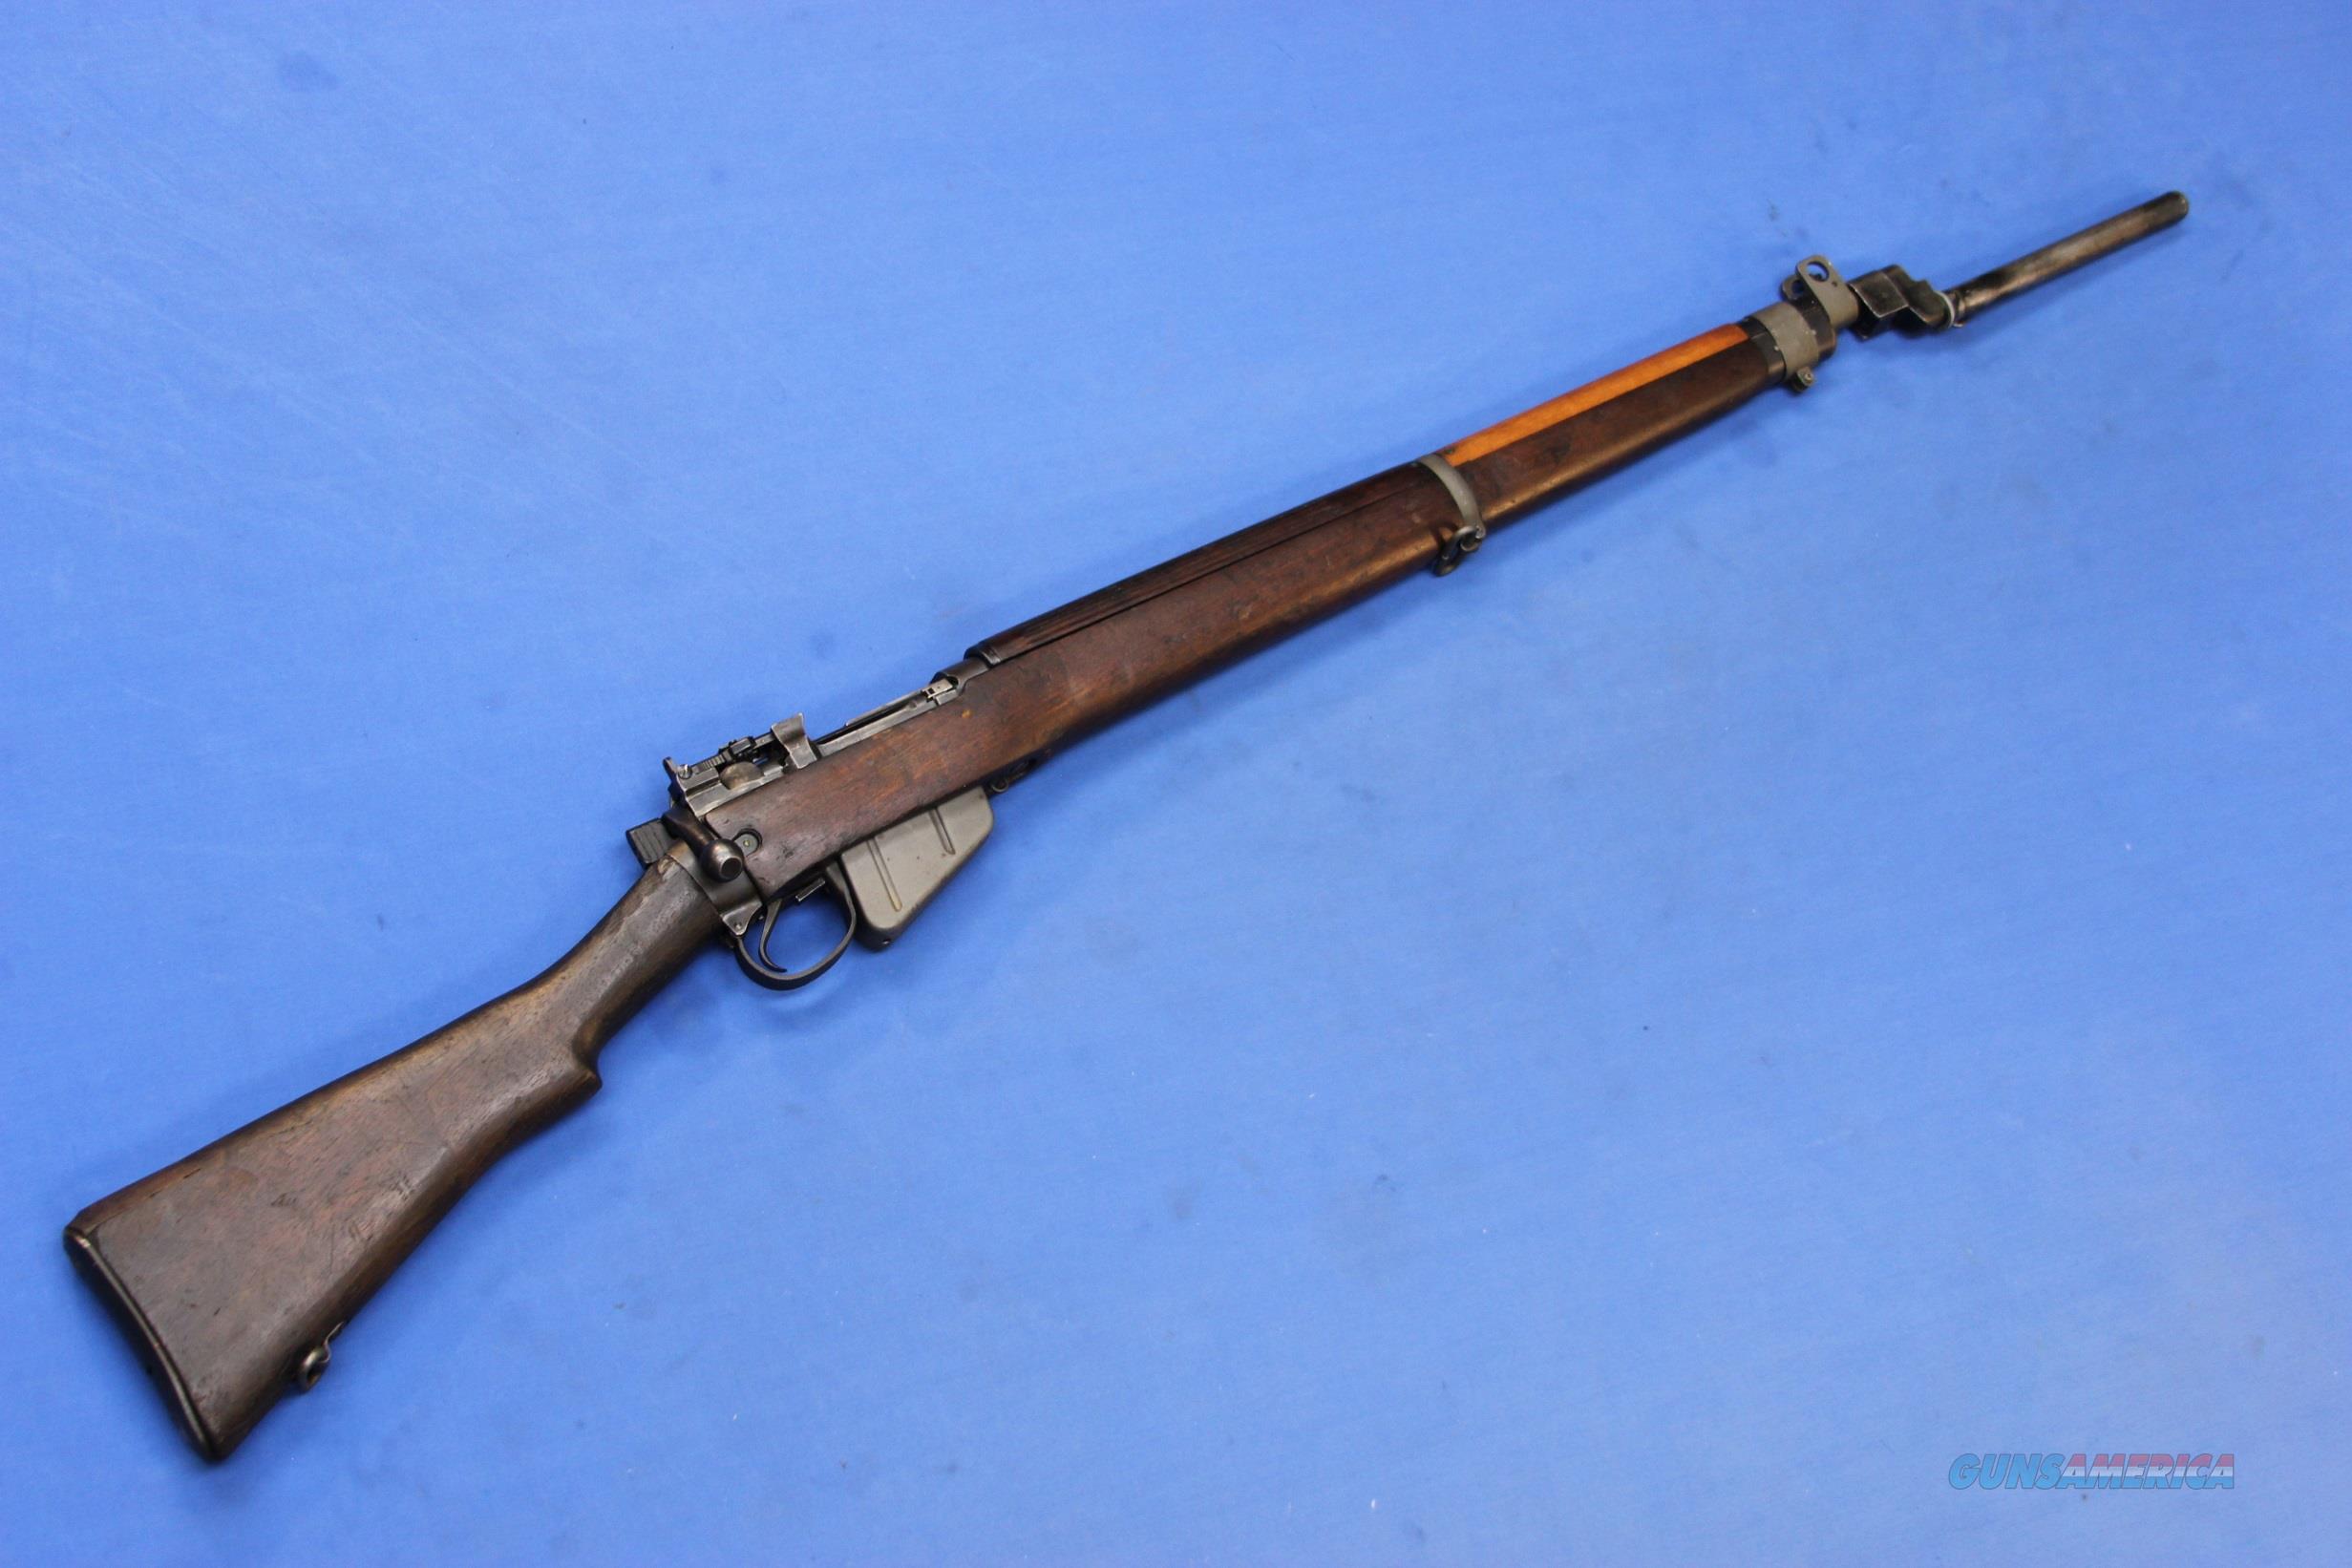 ENFIELD LONG BRANCH No. 4 Mk I SMLE for sale at :  997568904